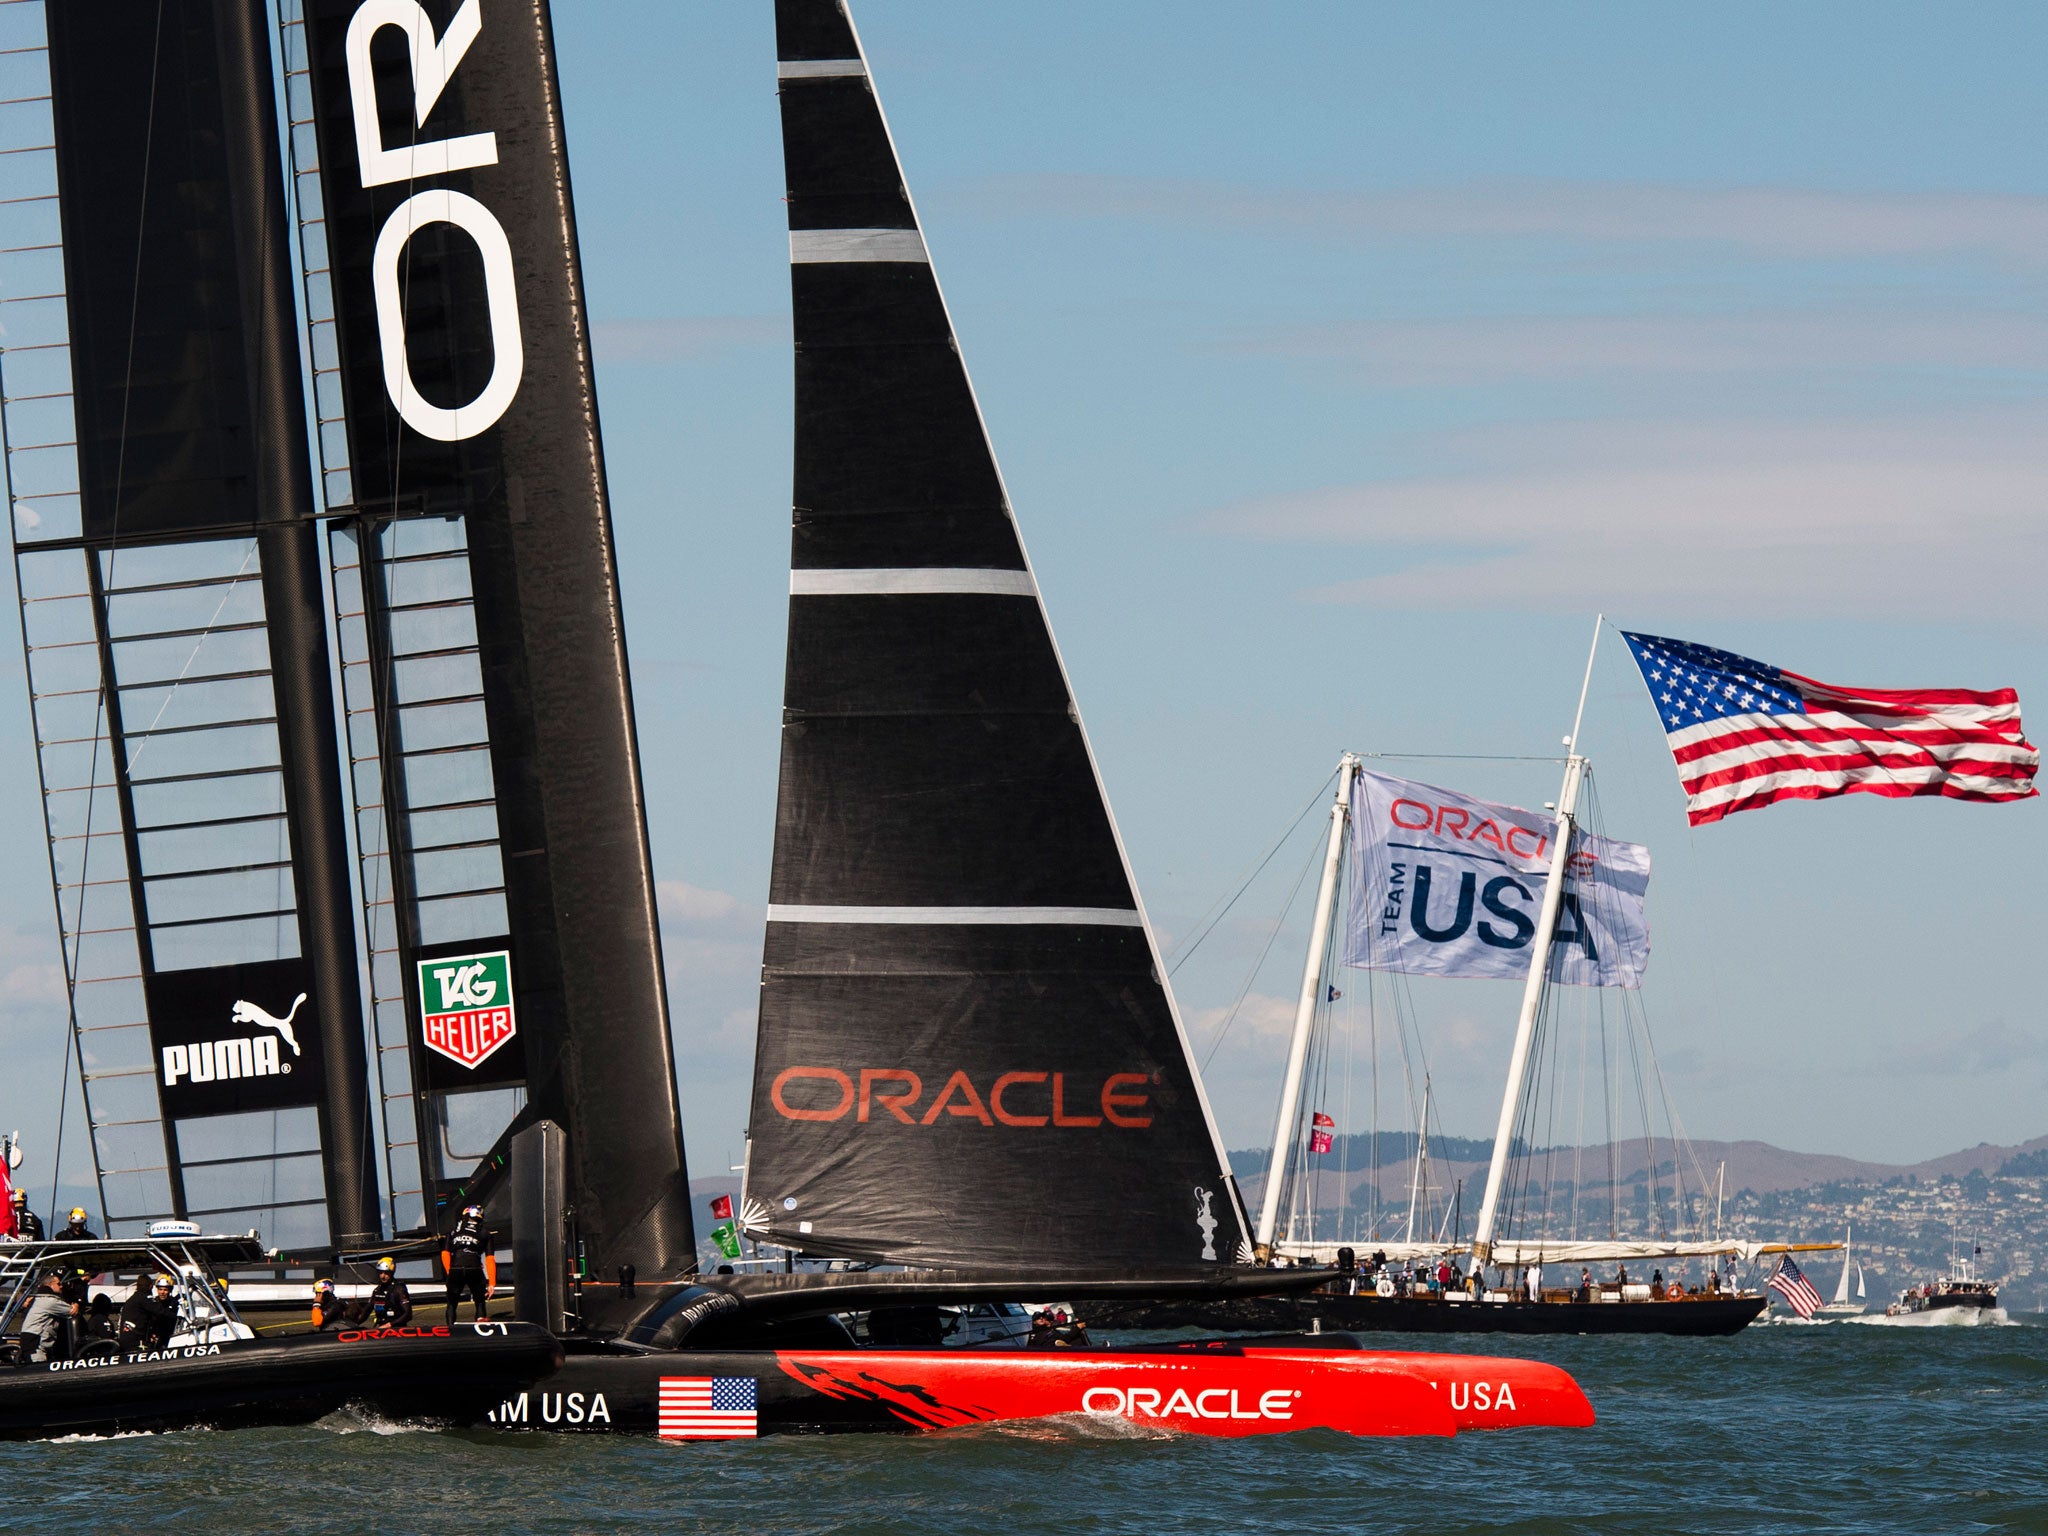 Oracle Team USA took another two race wins to pull back to within three points of Emirates Team New Zealand